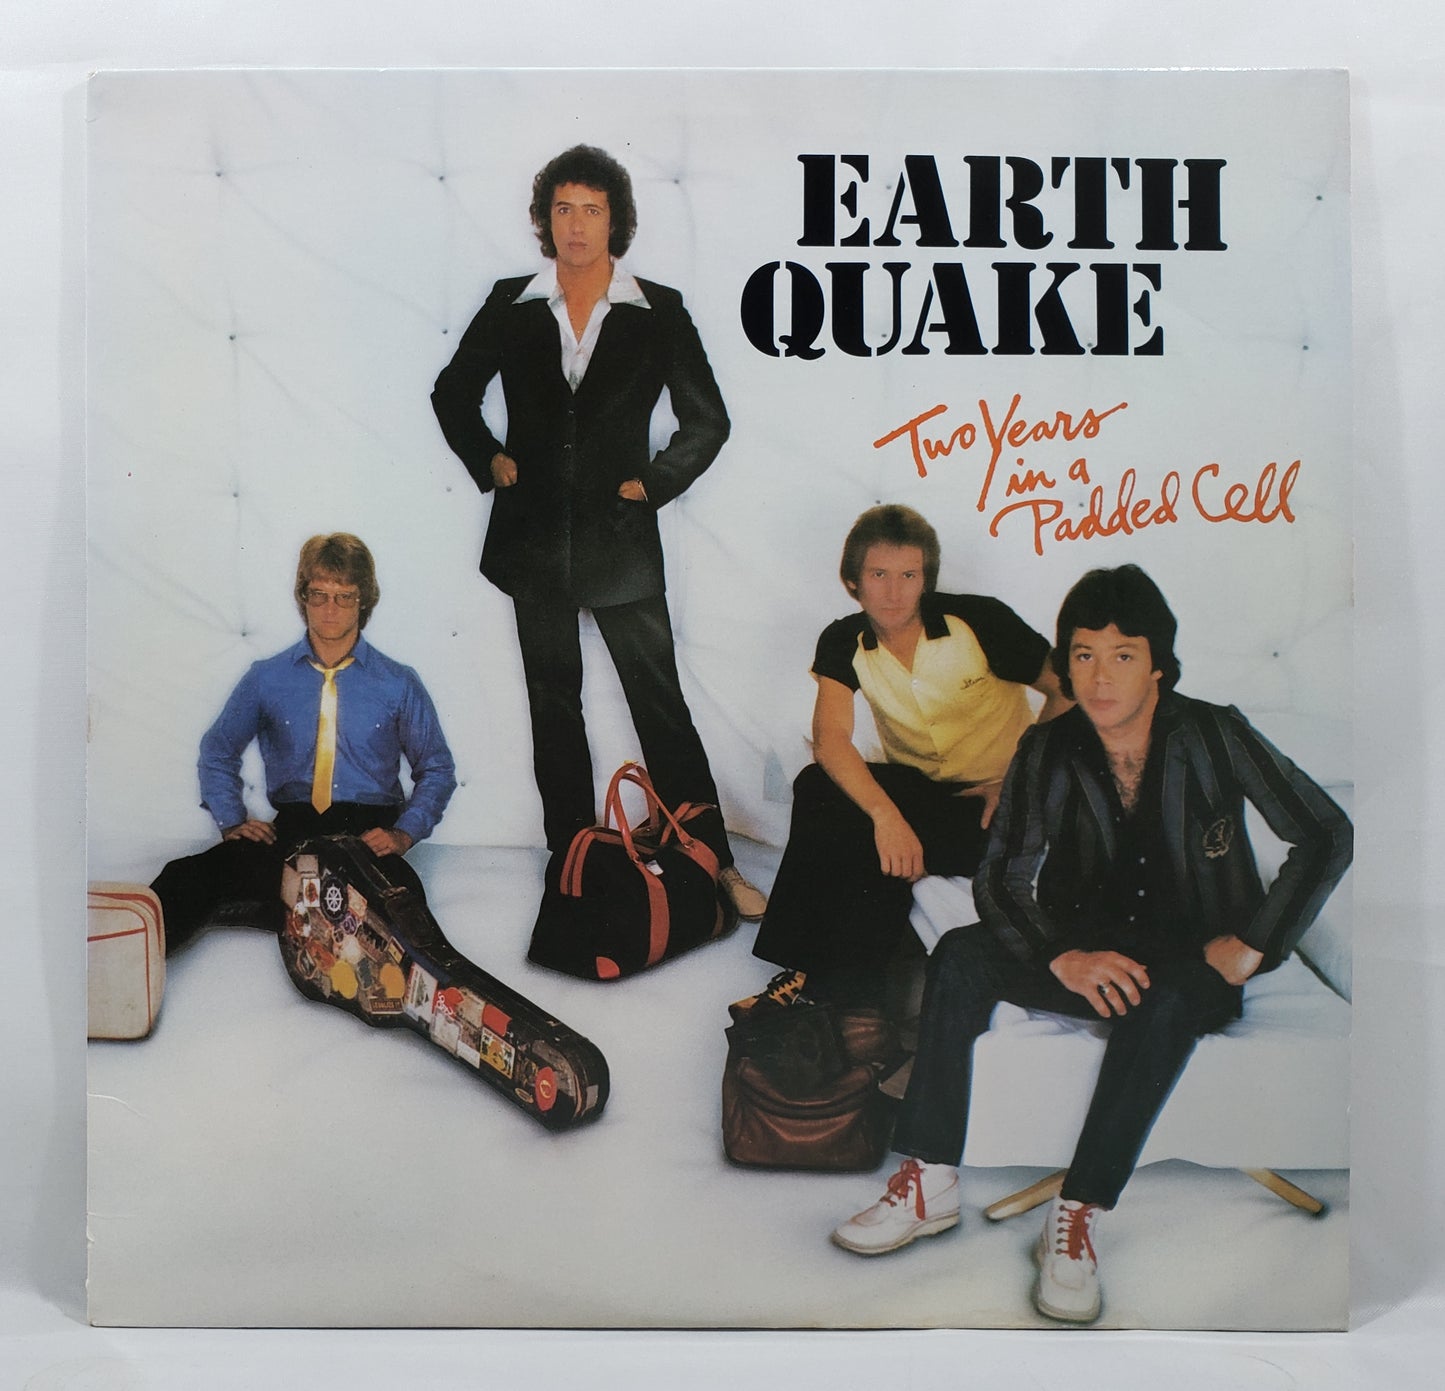 Earth Quake - Two Years i a Padded Cell [1979 Used Vinyl Record LP]